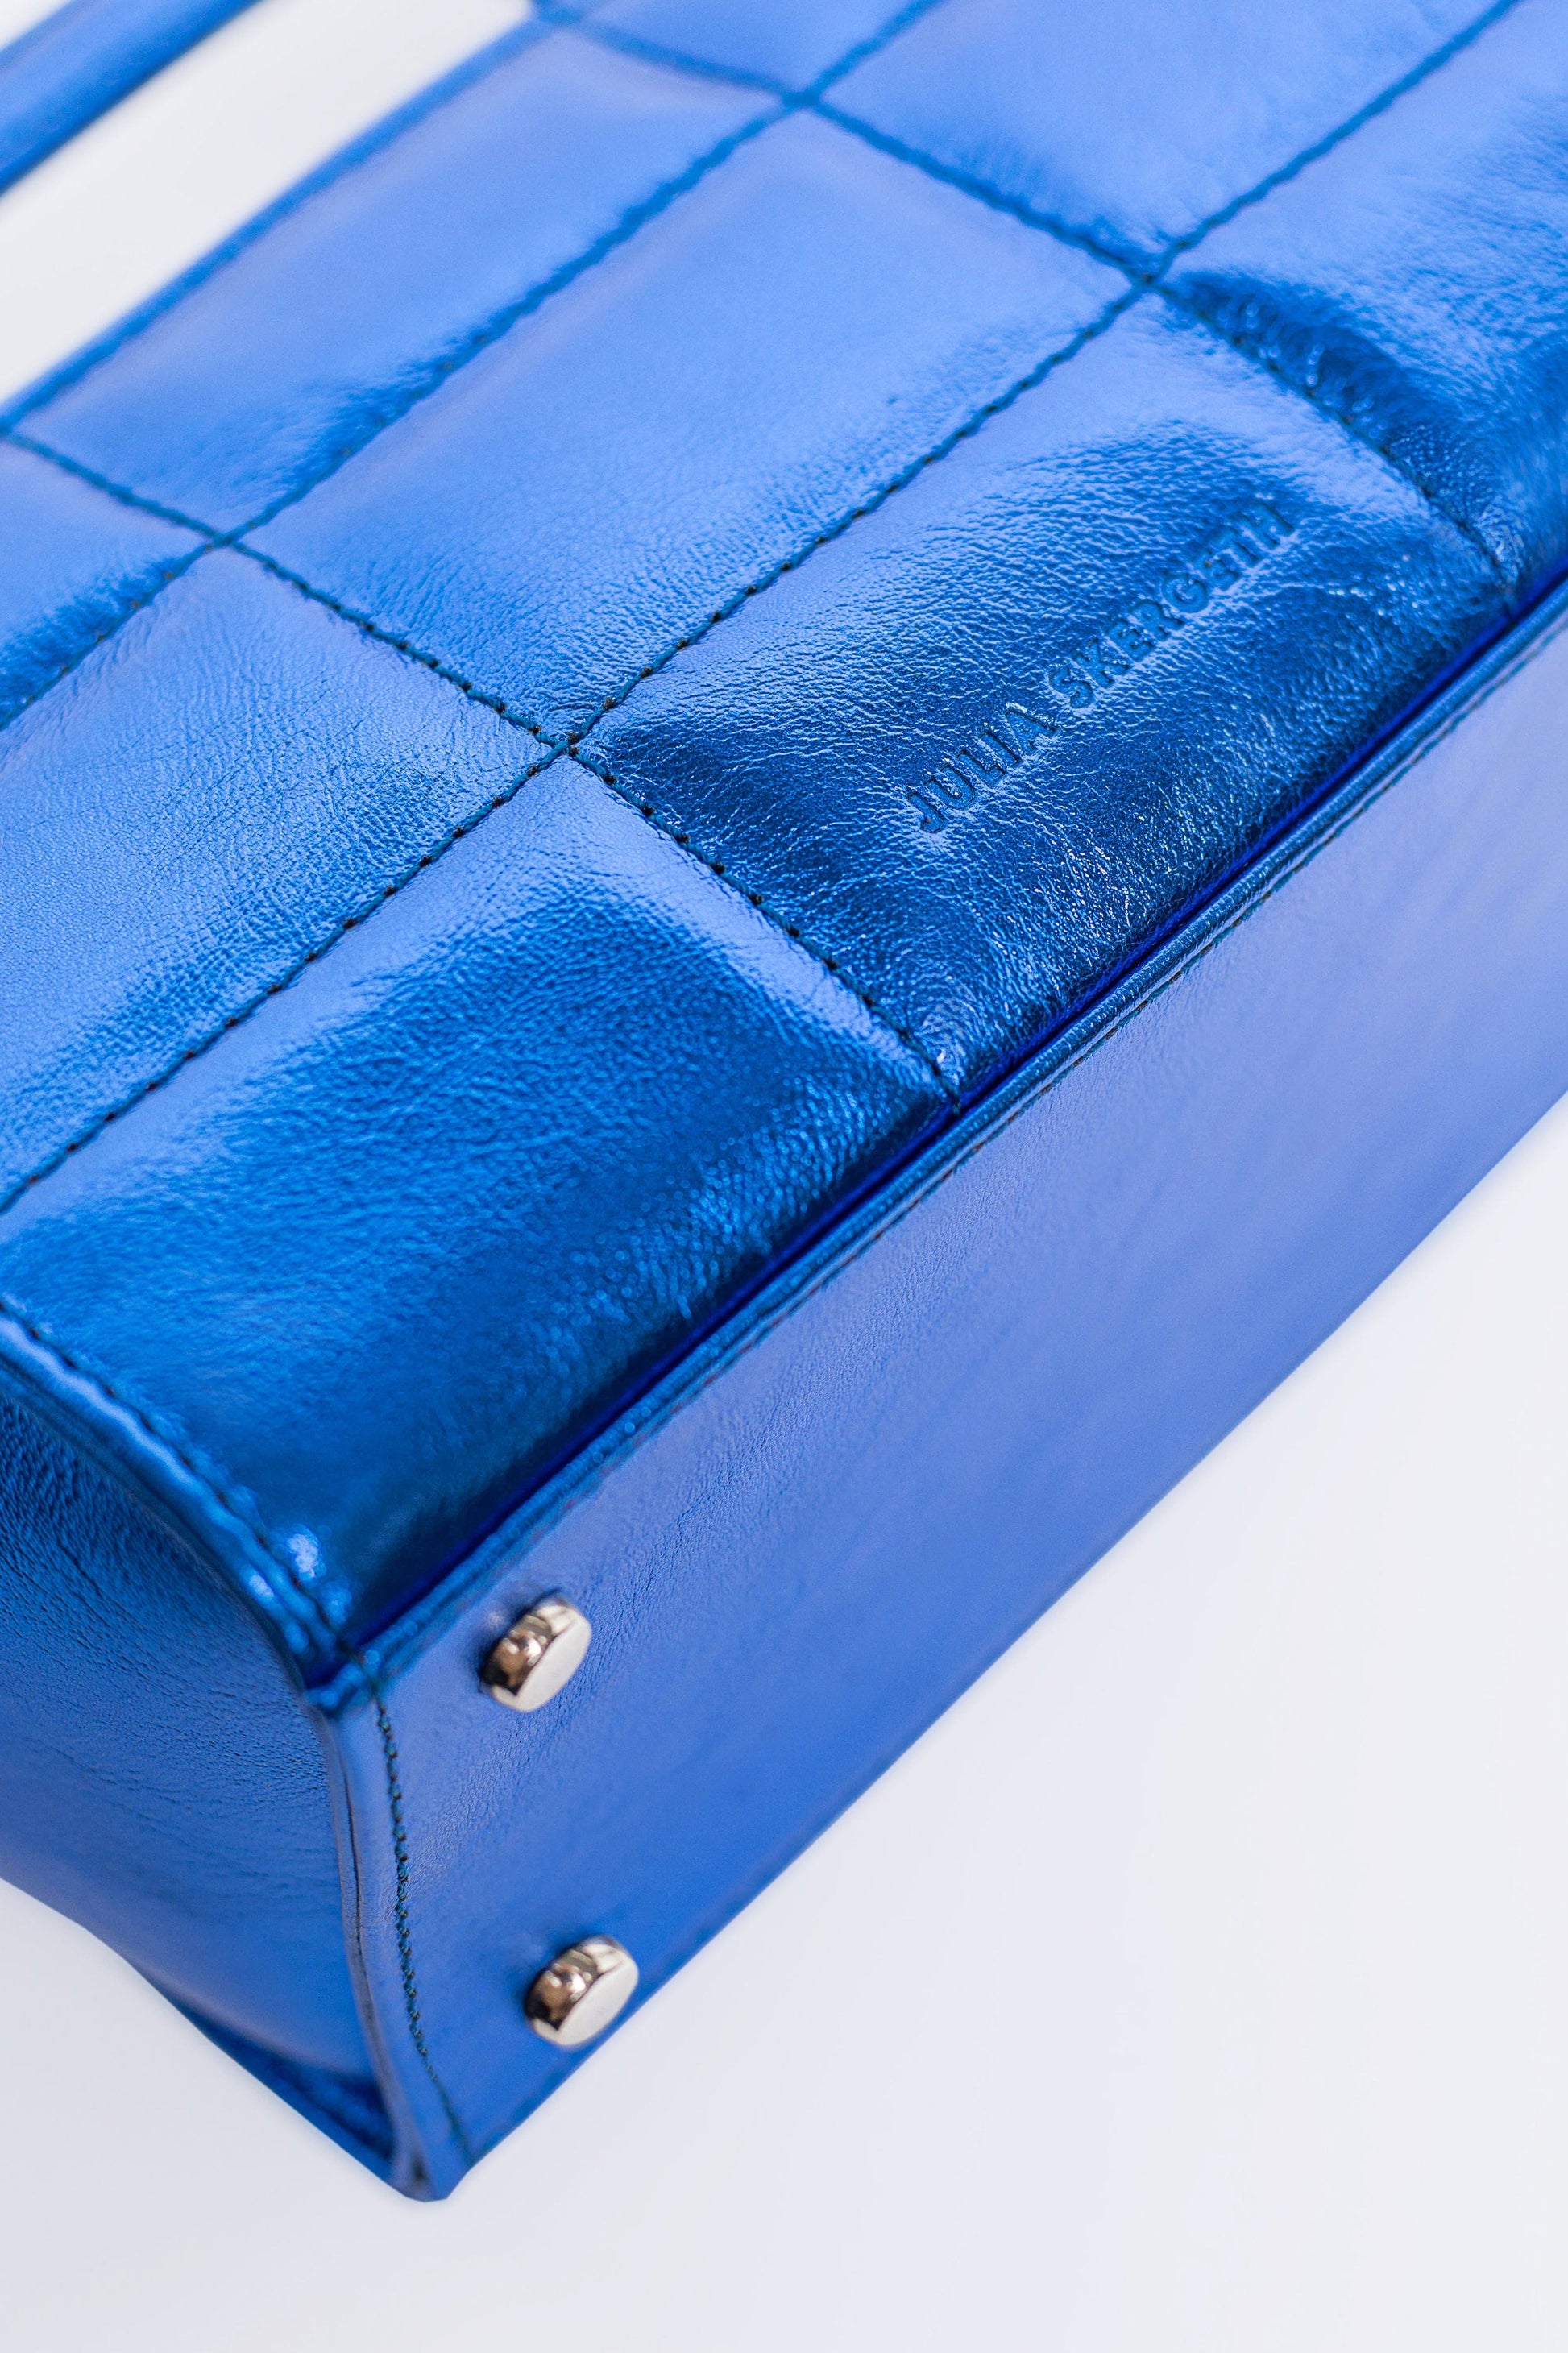 The QUILTED BAG MINI Electric Blue - JULIA SKERGETH